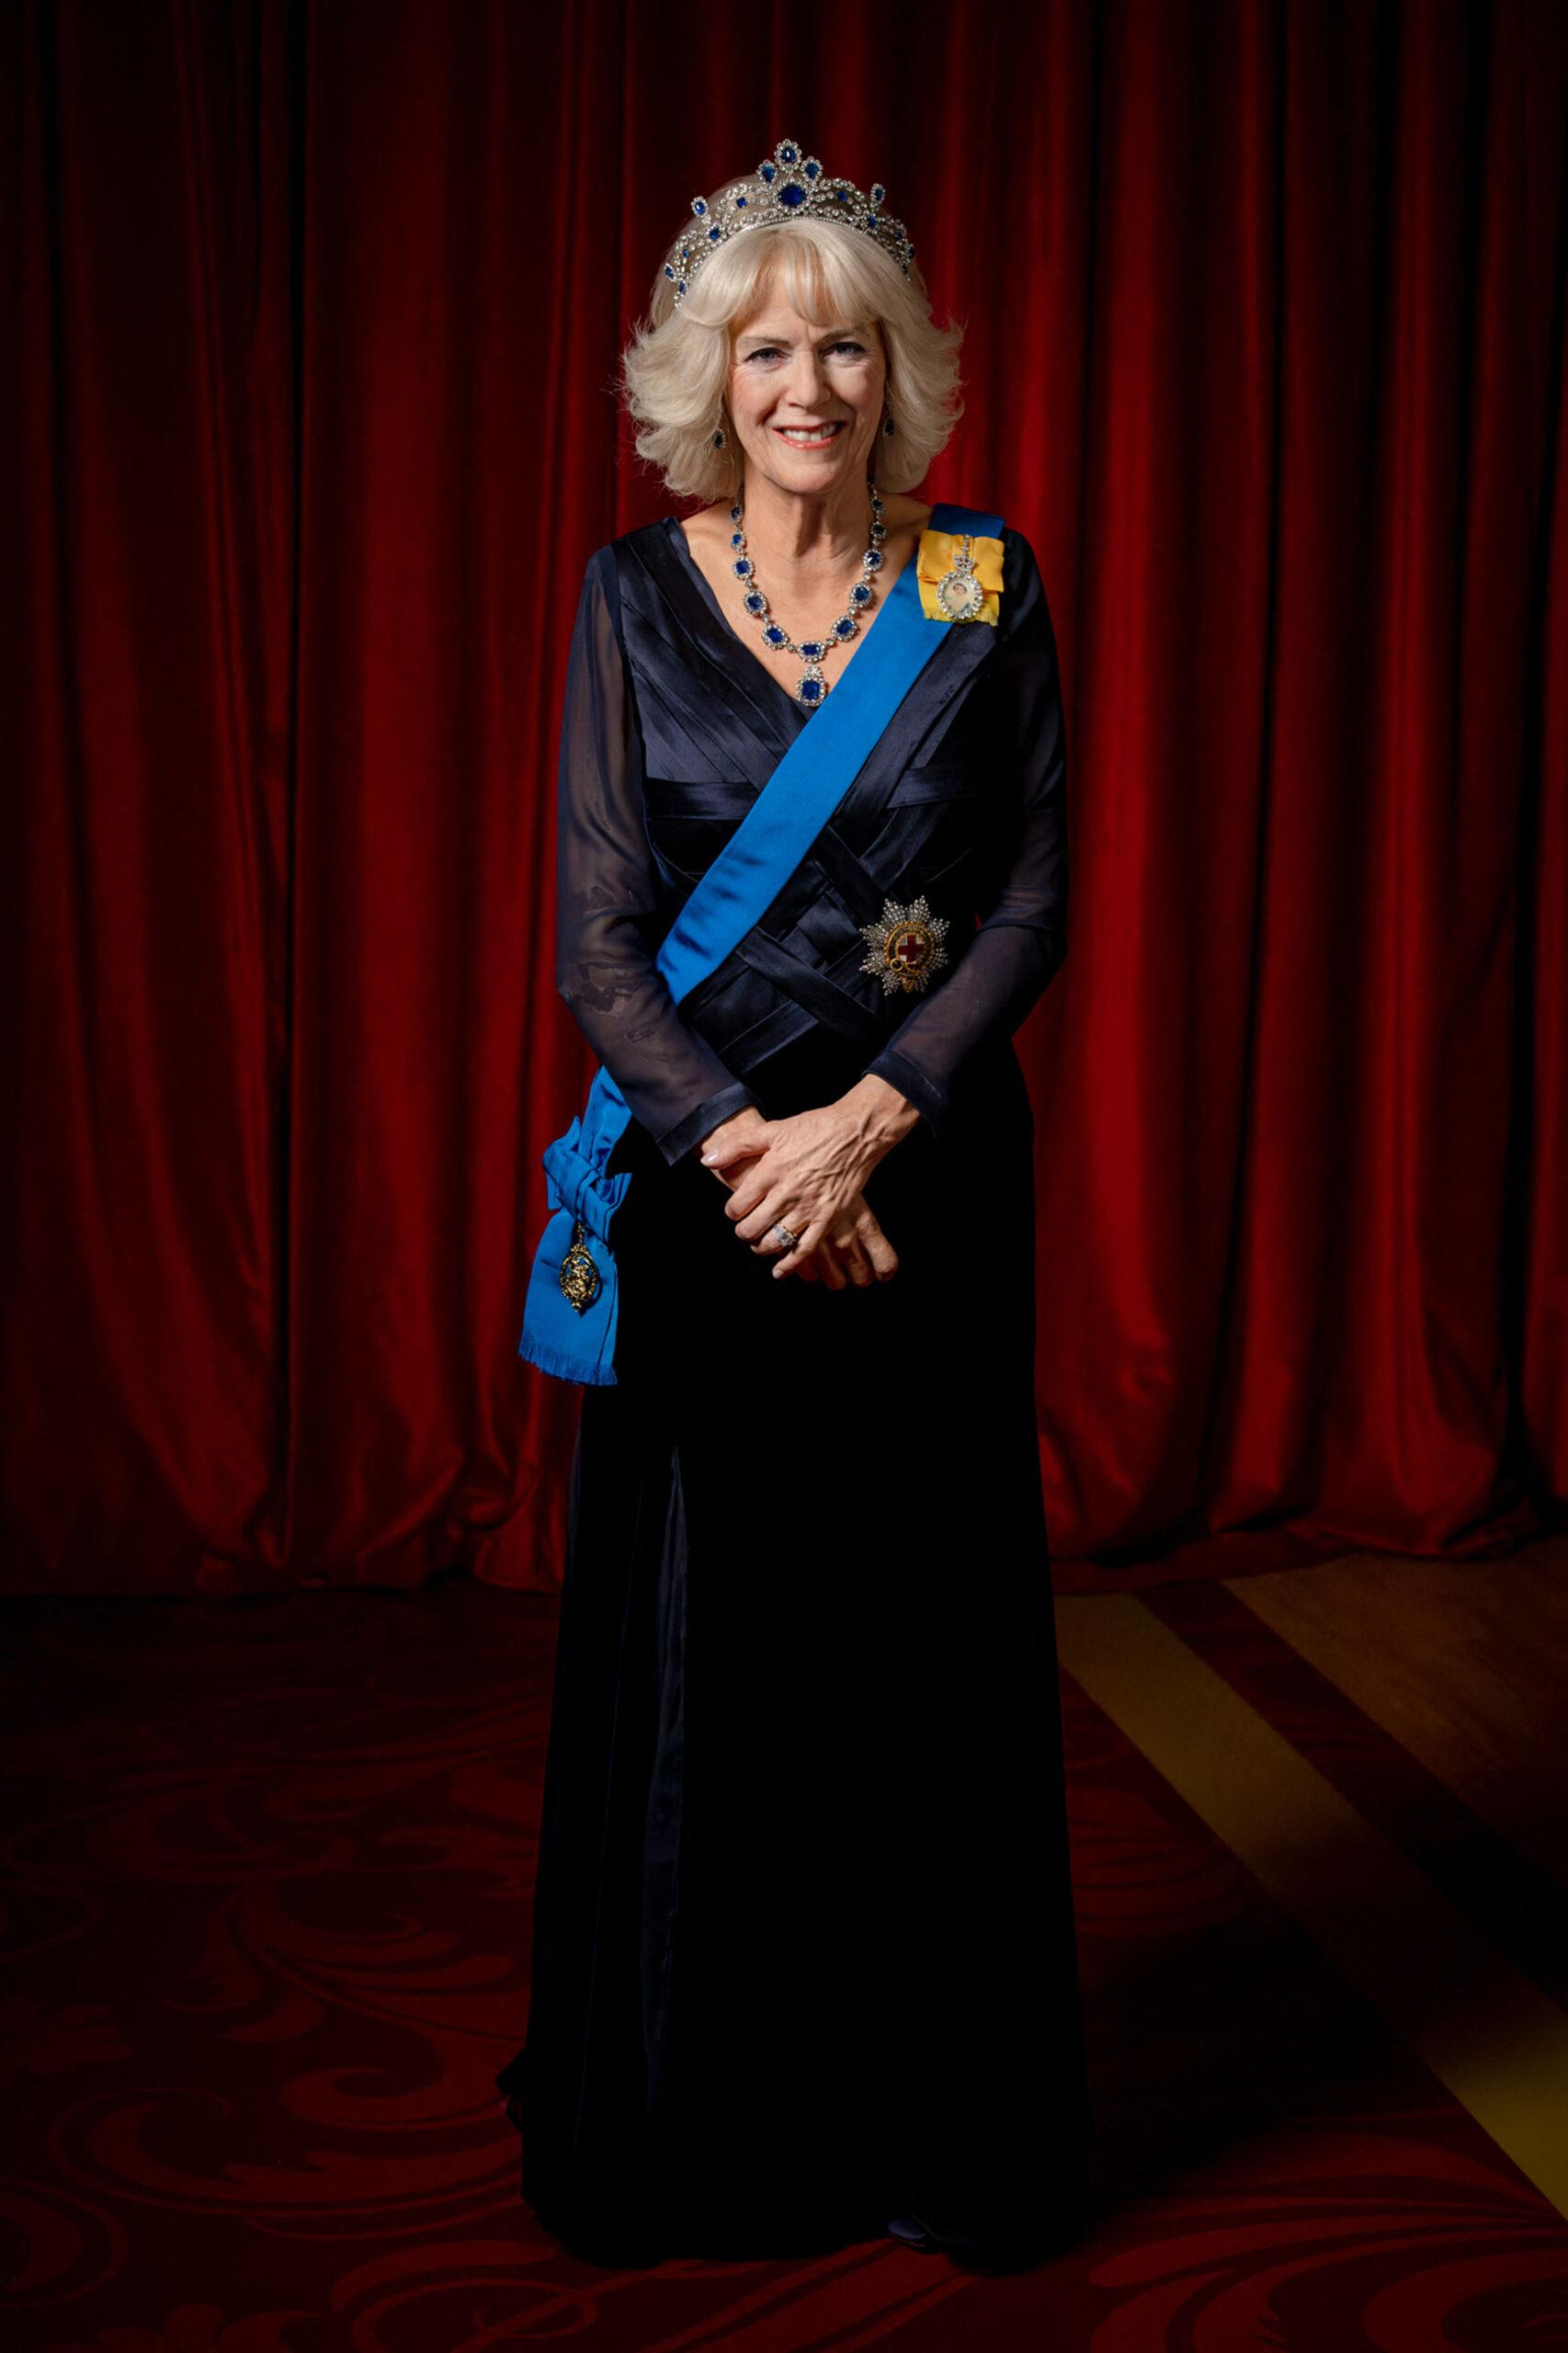 New wax figure of soon-to-be Queen Camilla unveiled at Madame Tussauds London